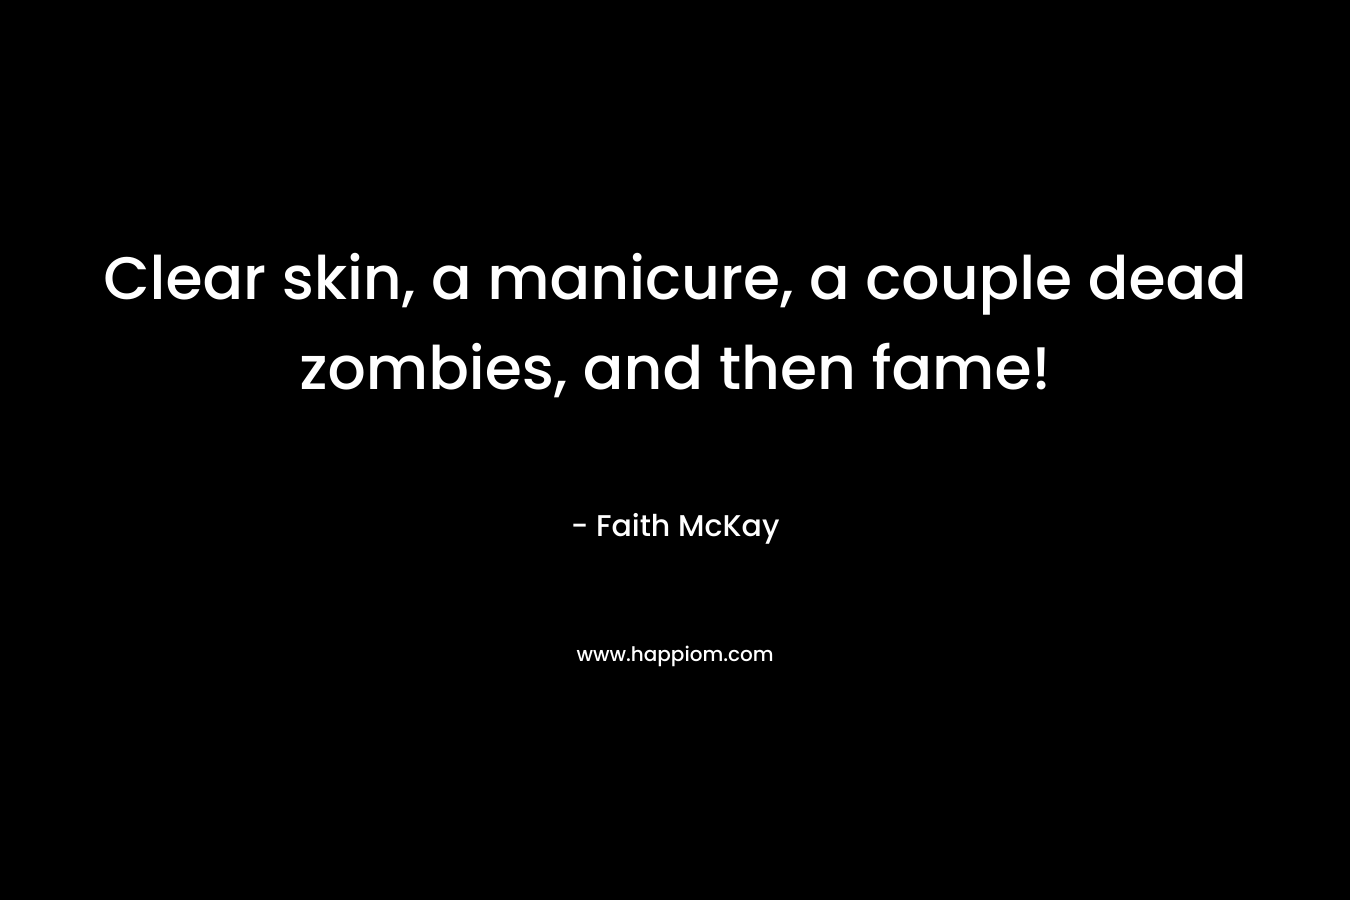 Clear skin, a manicure, a couple dead zombies, and then fame!